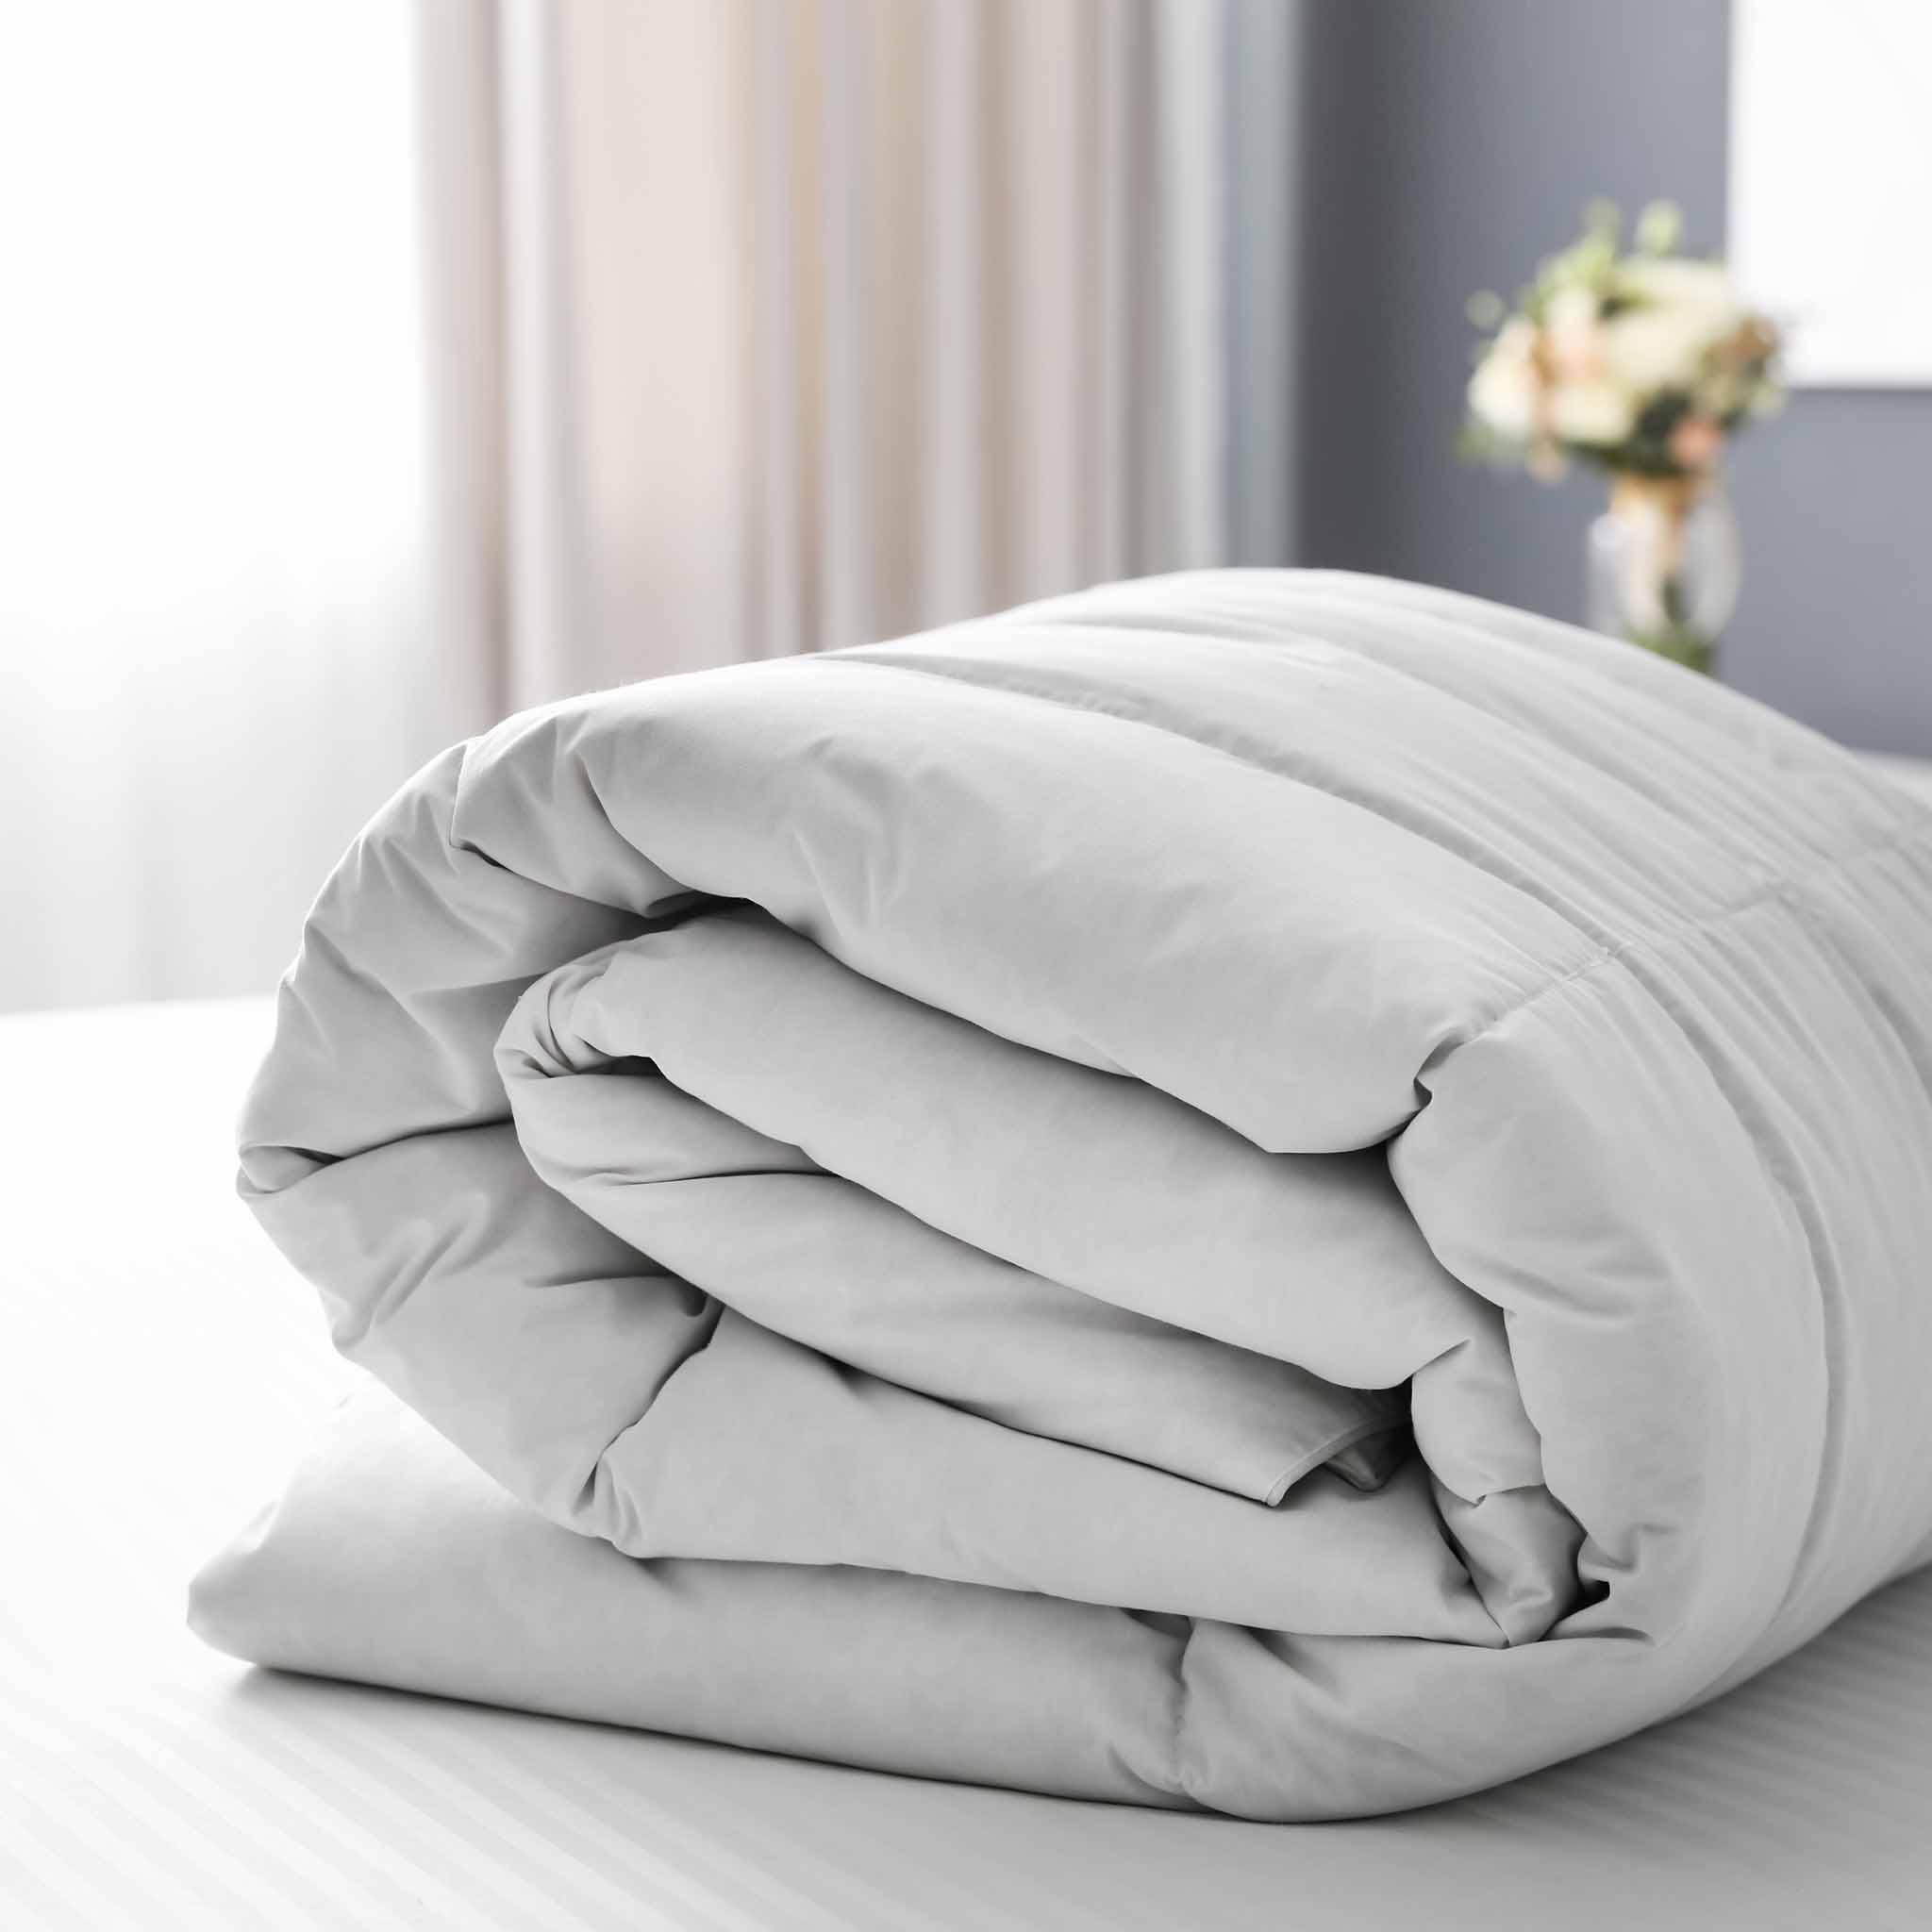 Our selection of luxury comforters, duvets, and blankets offers the finest in materials and craftsmanship.